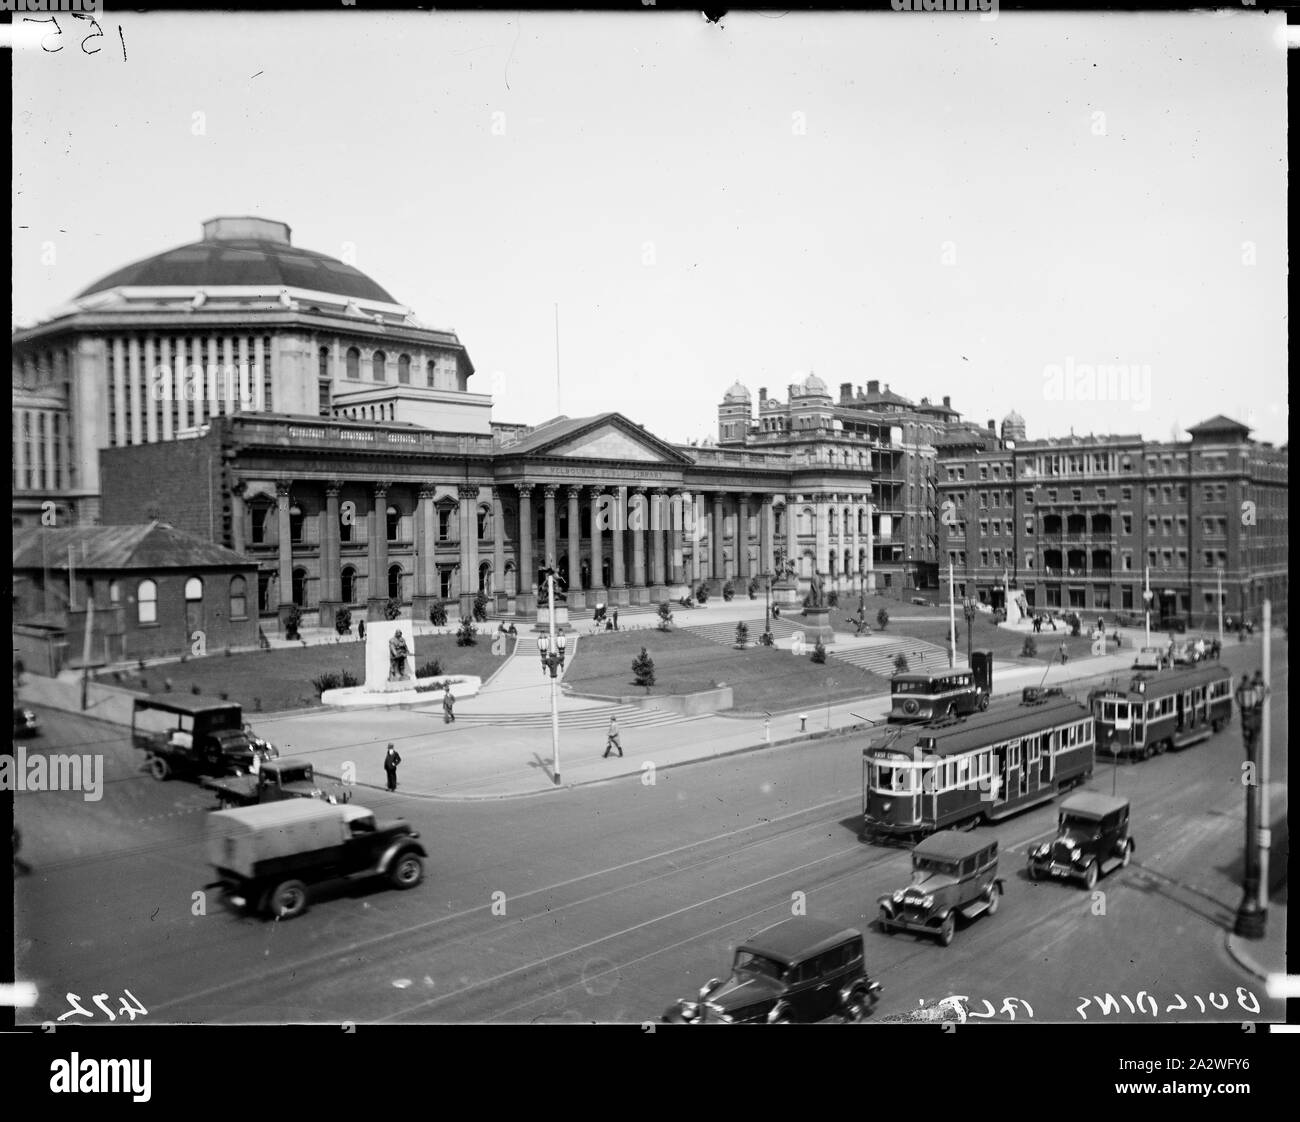 Glass Negative - View of Industrial & Technological Museum from corner of Swanston Street & LaTrobe Street, Melbourne, circa 1930s, Negative copy of photograph showing the Swanston Street entrance to the Industrial & Technological Museum, with Dome completed Stock Photo